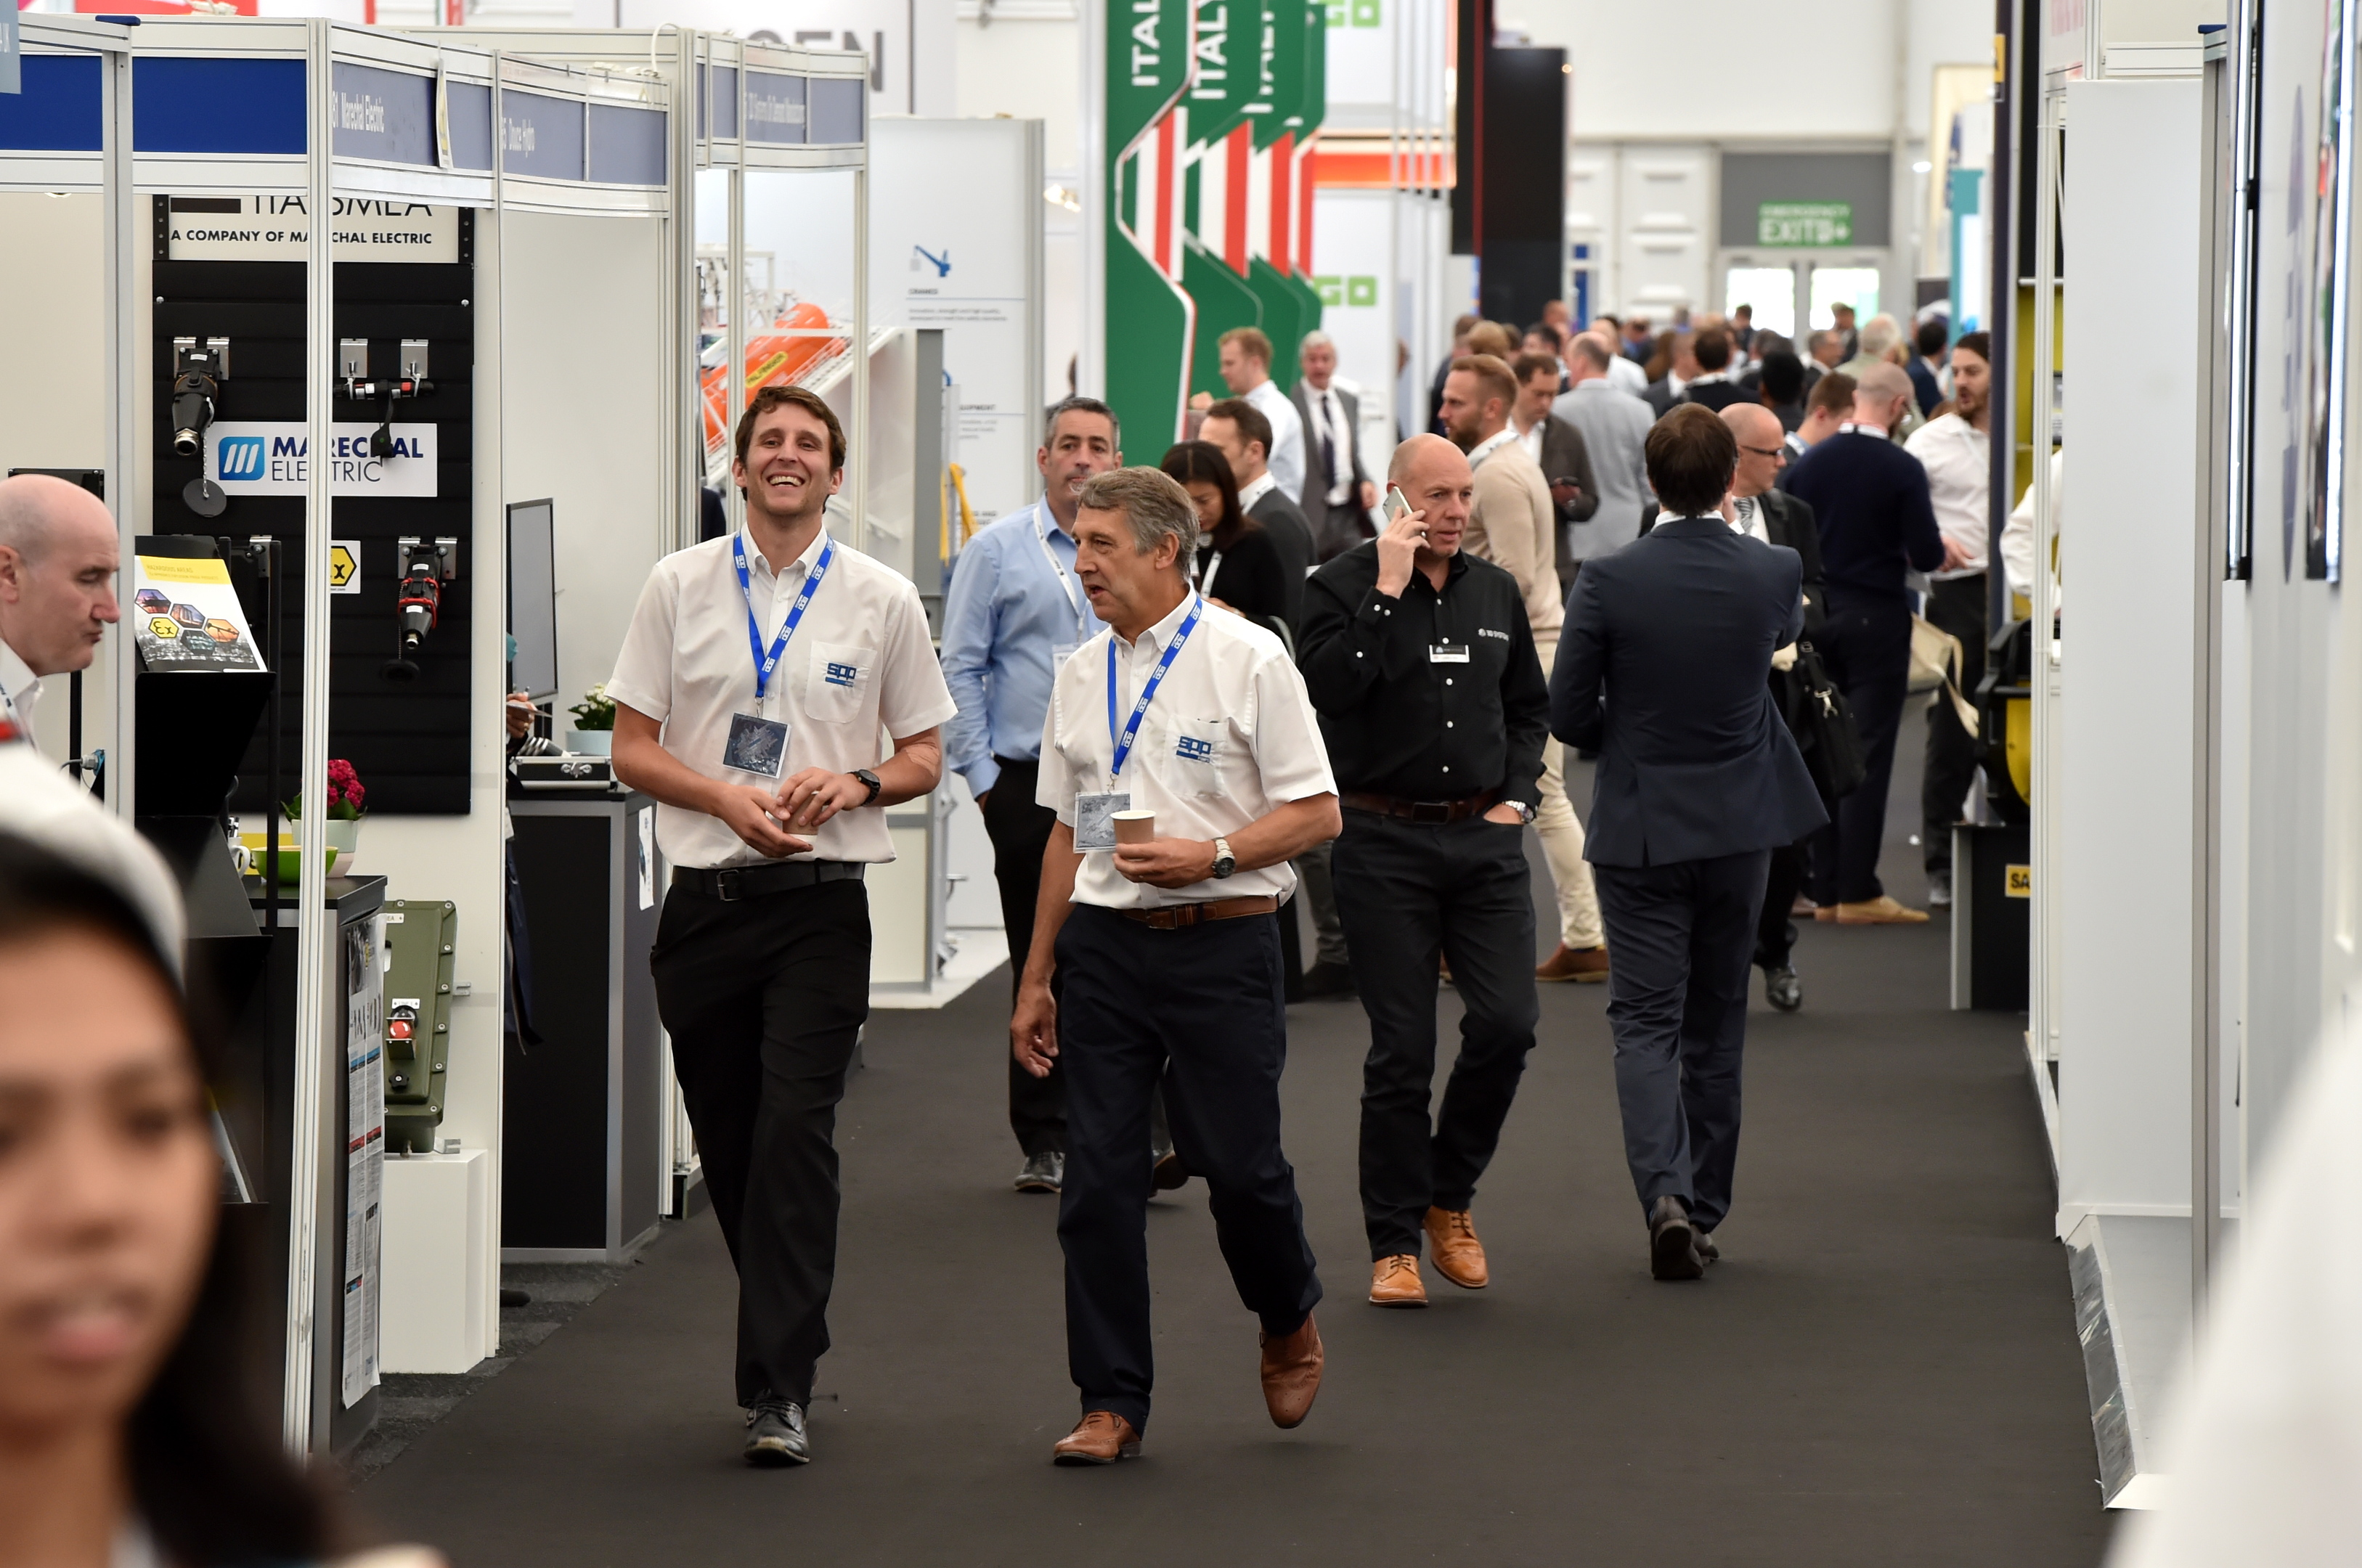 Offshore Europe 2019 will take place in September.